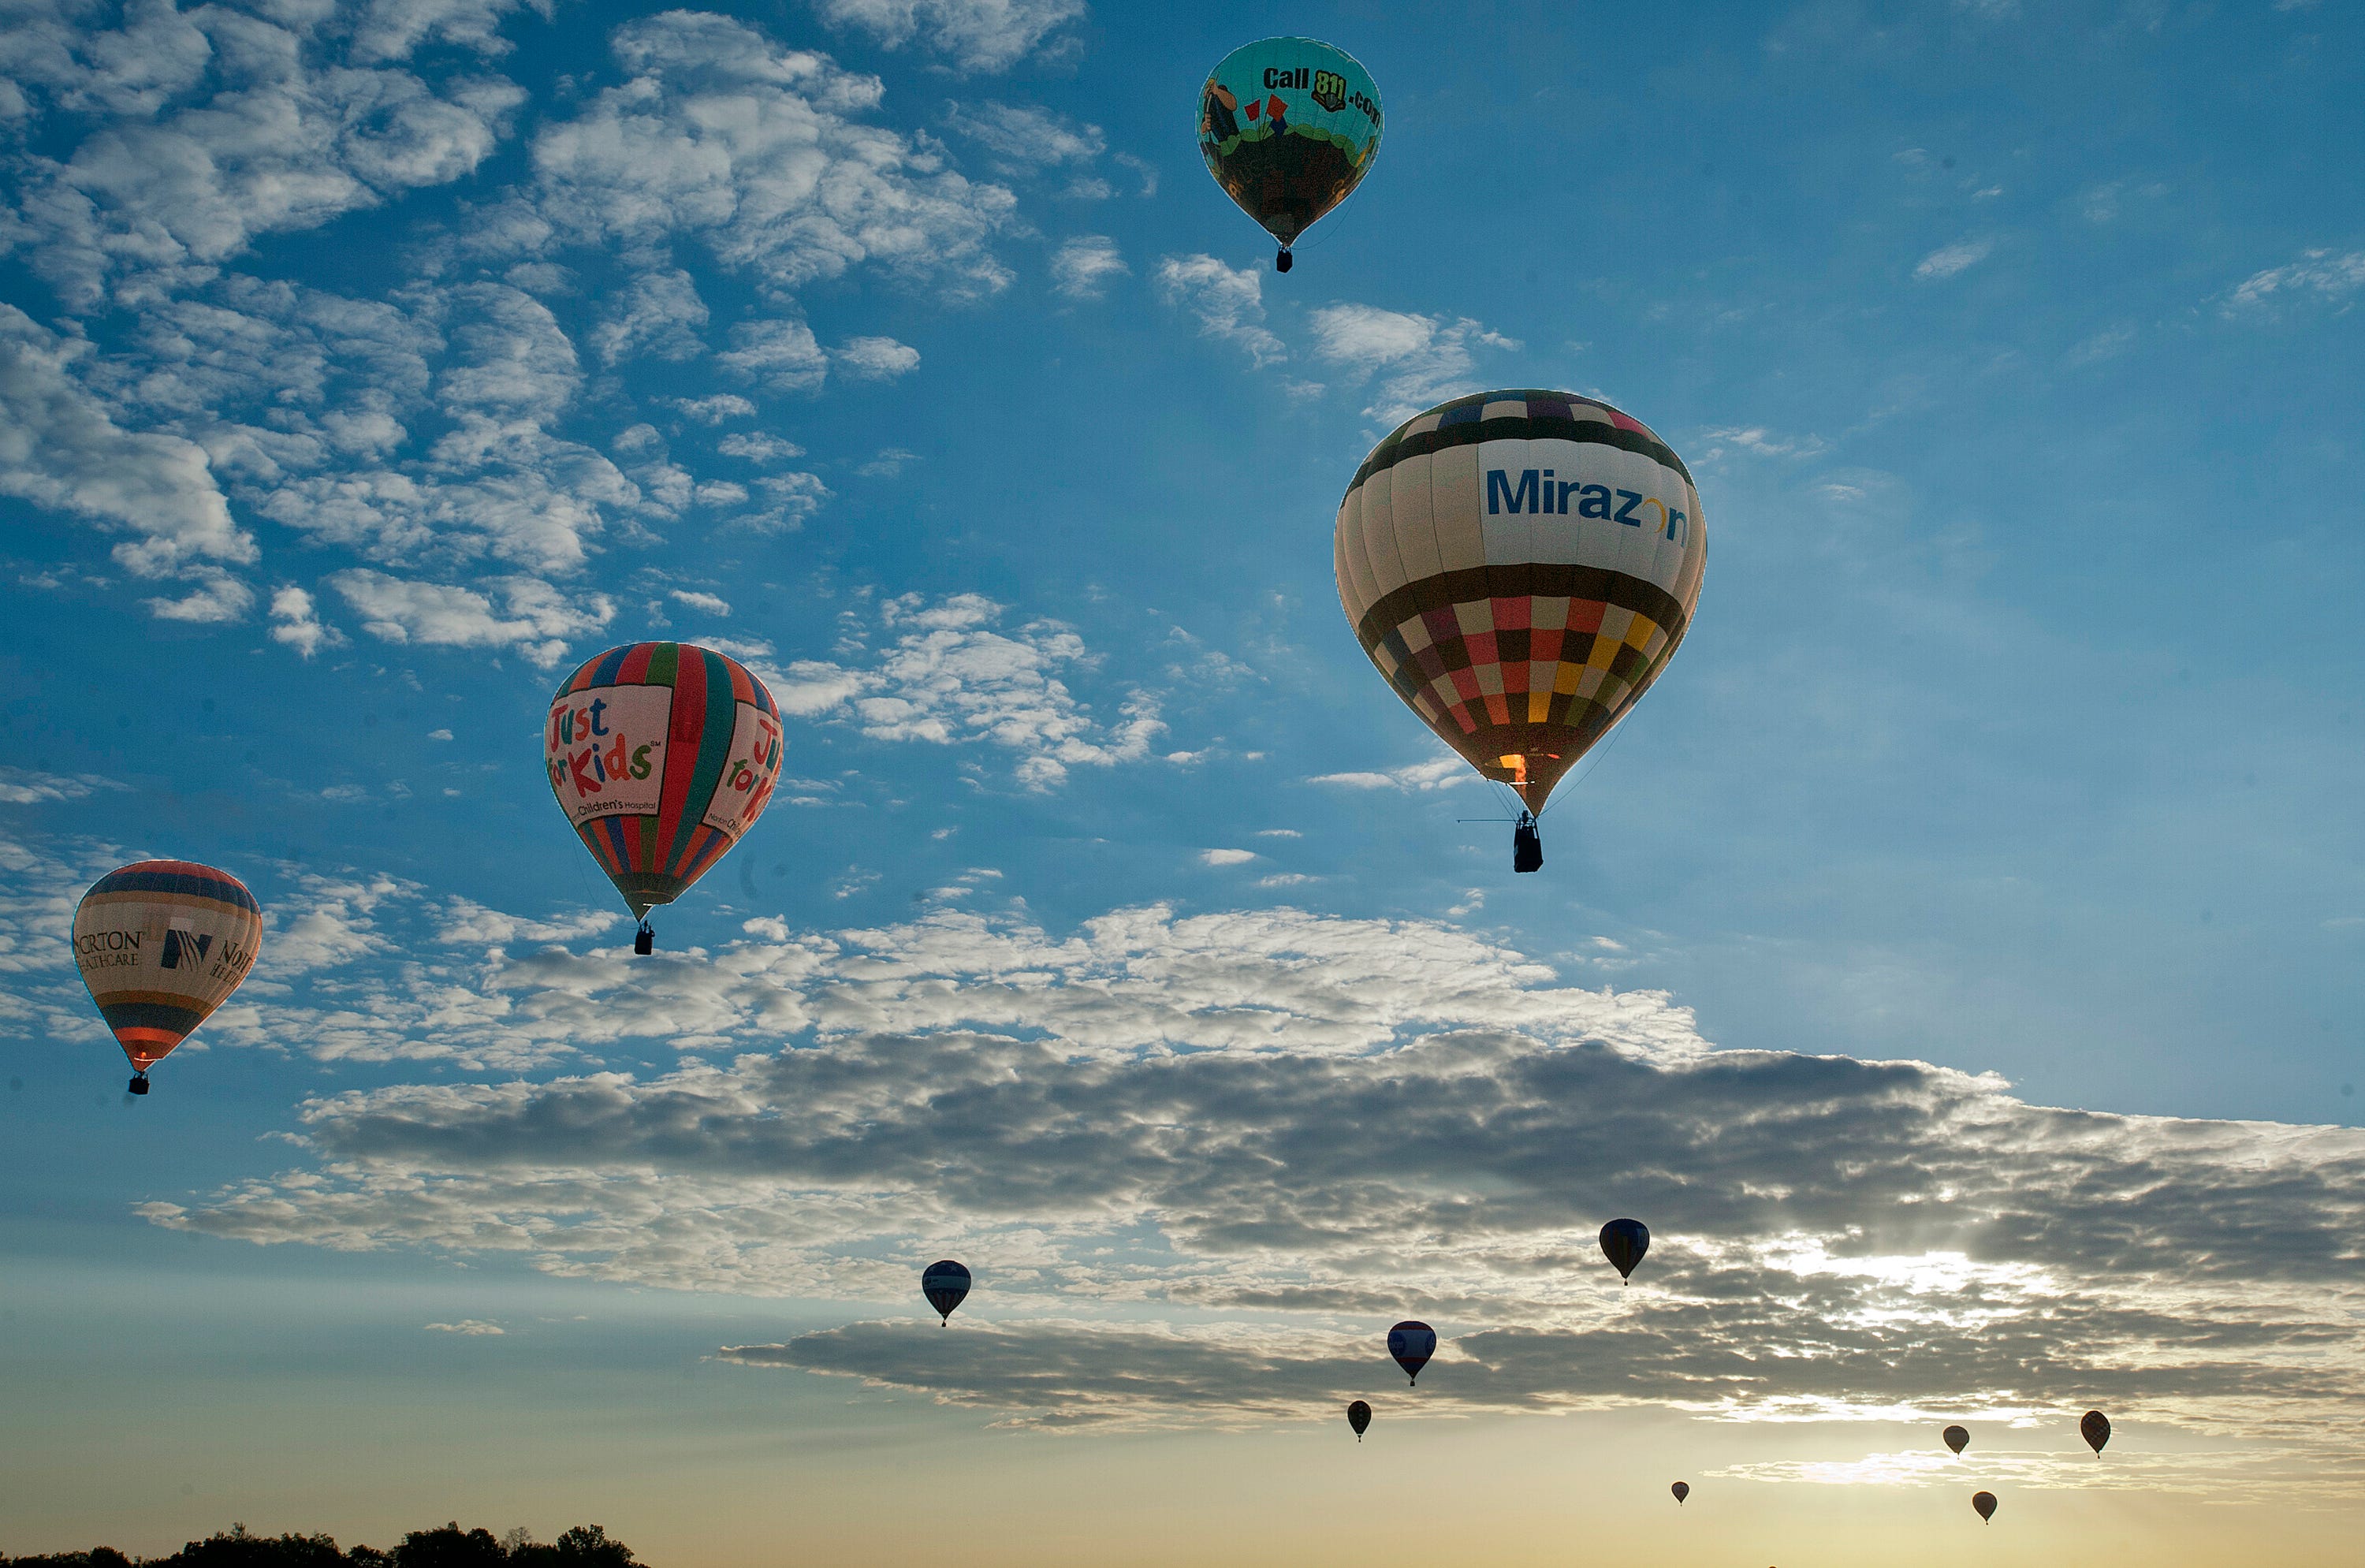 The Great Balloon Race takes flight above Louisville ahead of the